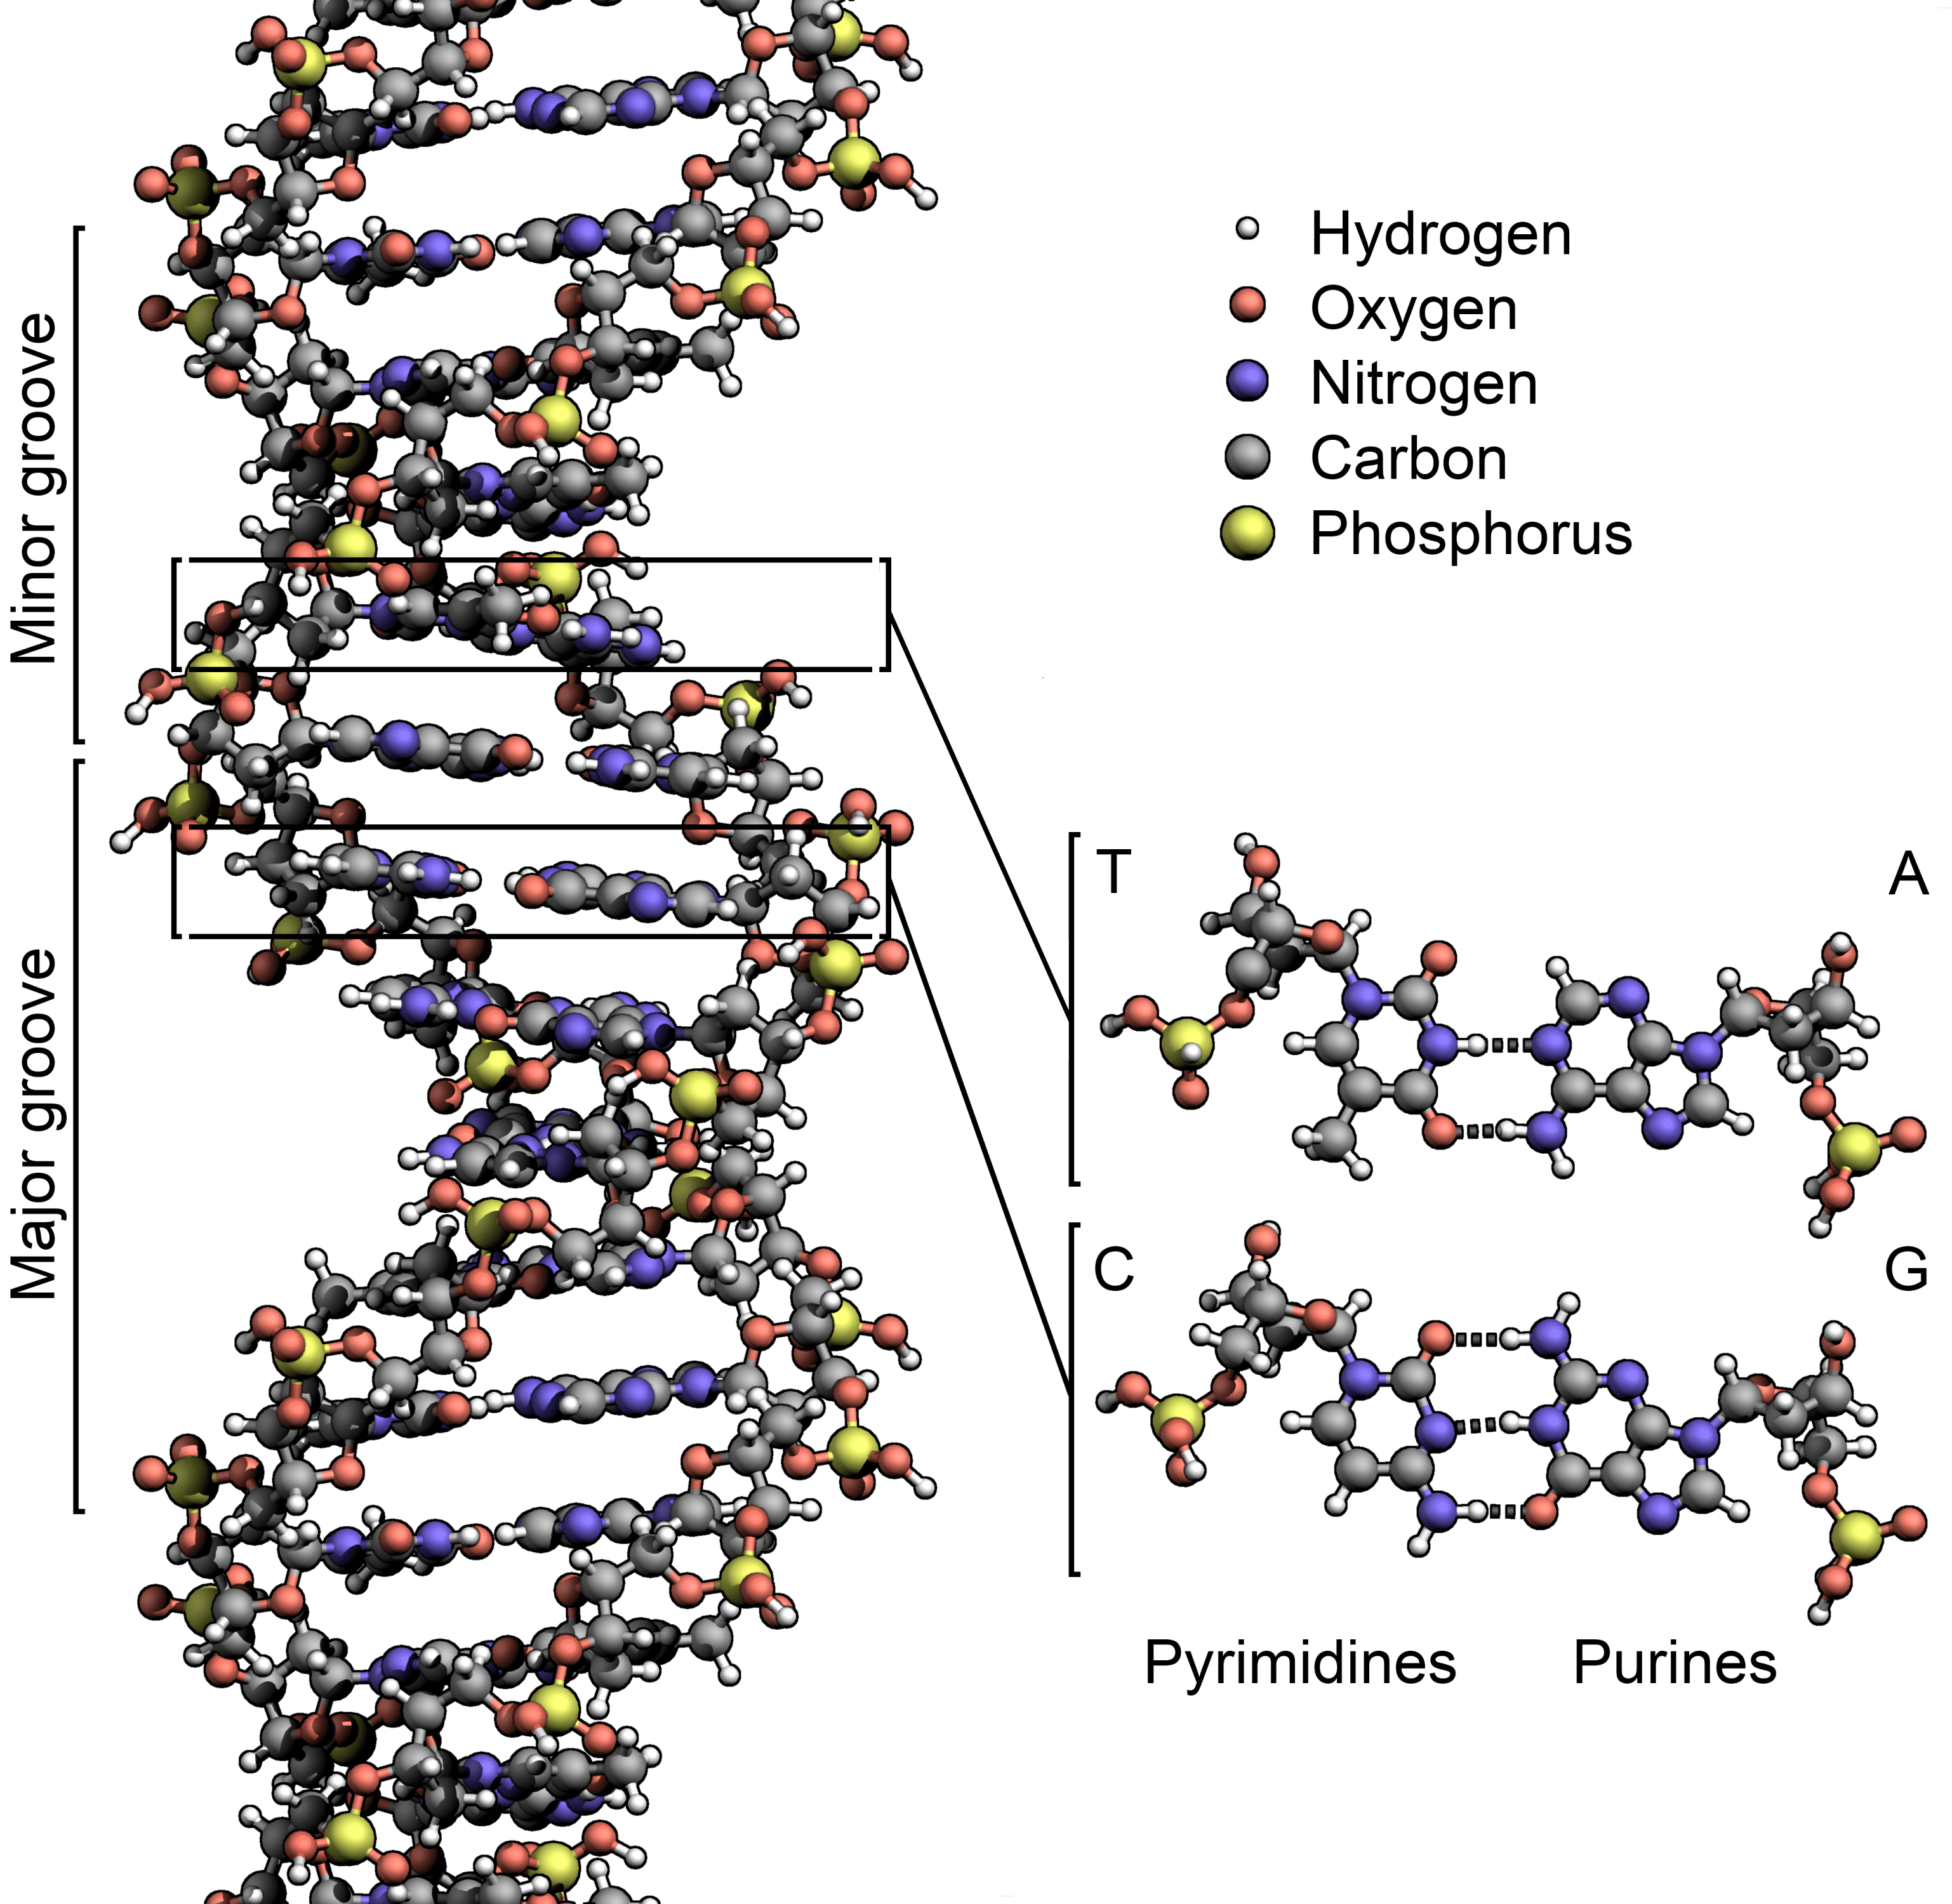 The structure of the DNA double helix. The atoms in the structure are colour-coded by element and the detailed structures of two base pairs are shown in the bottom right. Image credits: Zephyris / Wikipedia.